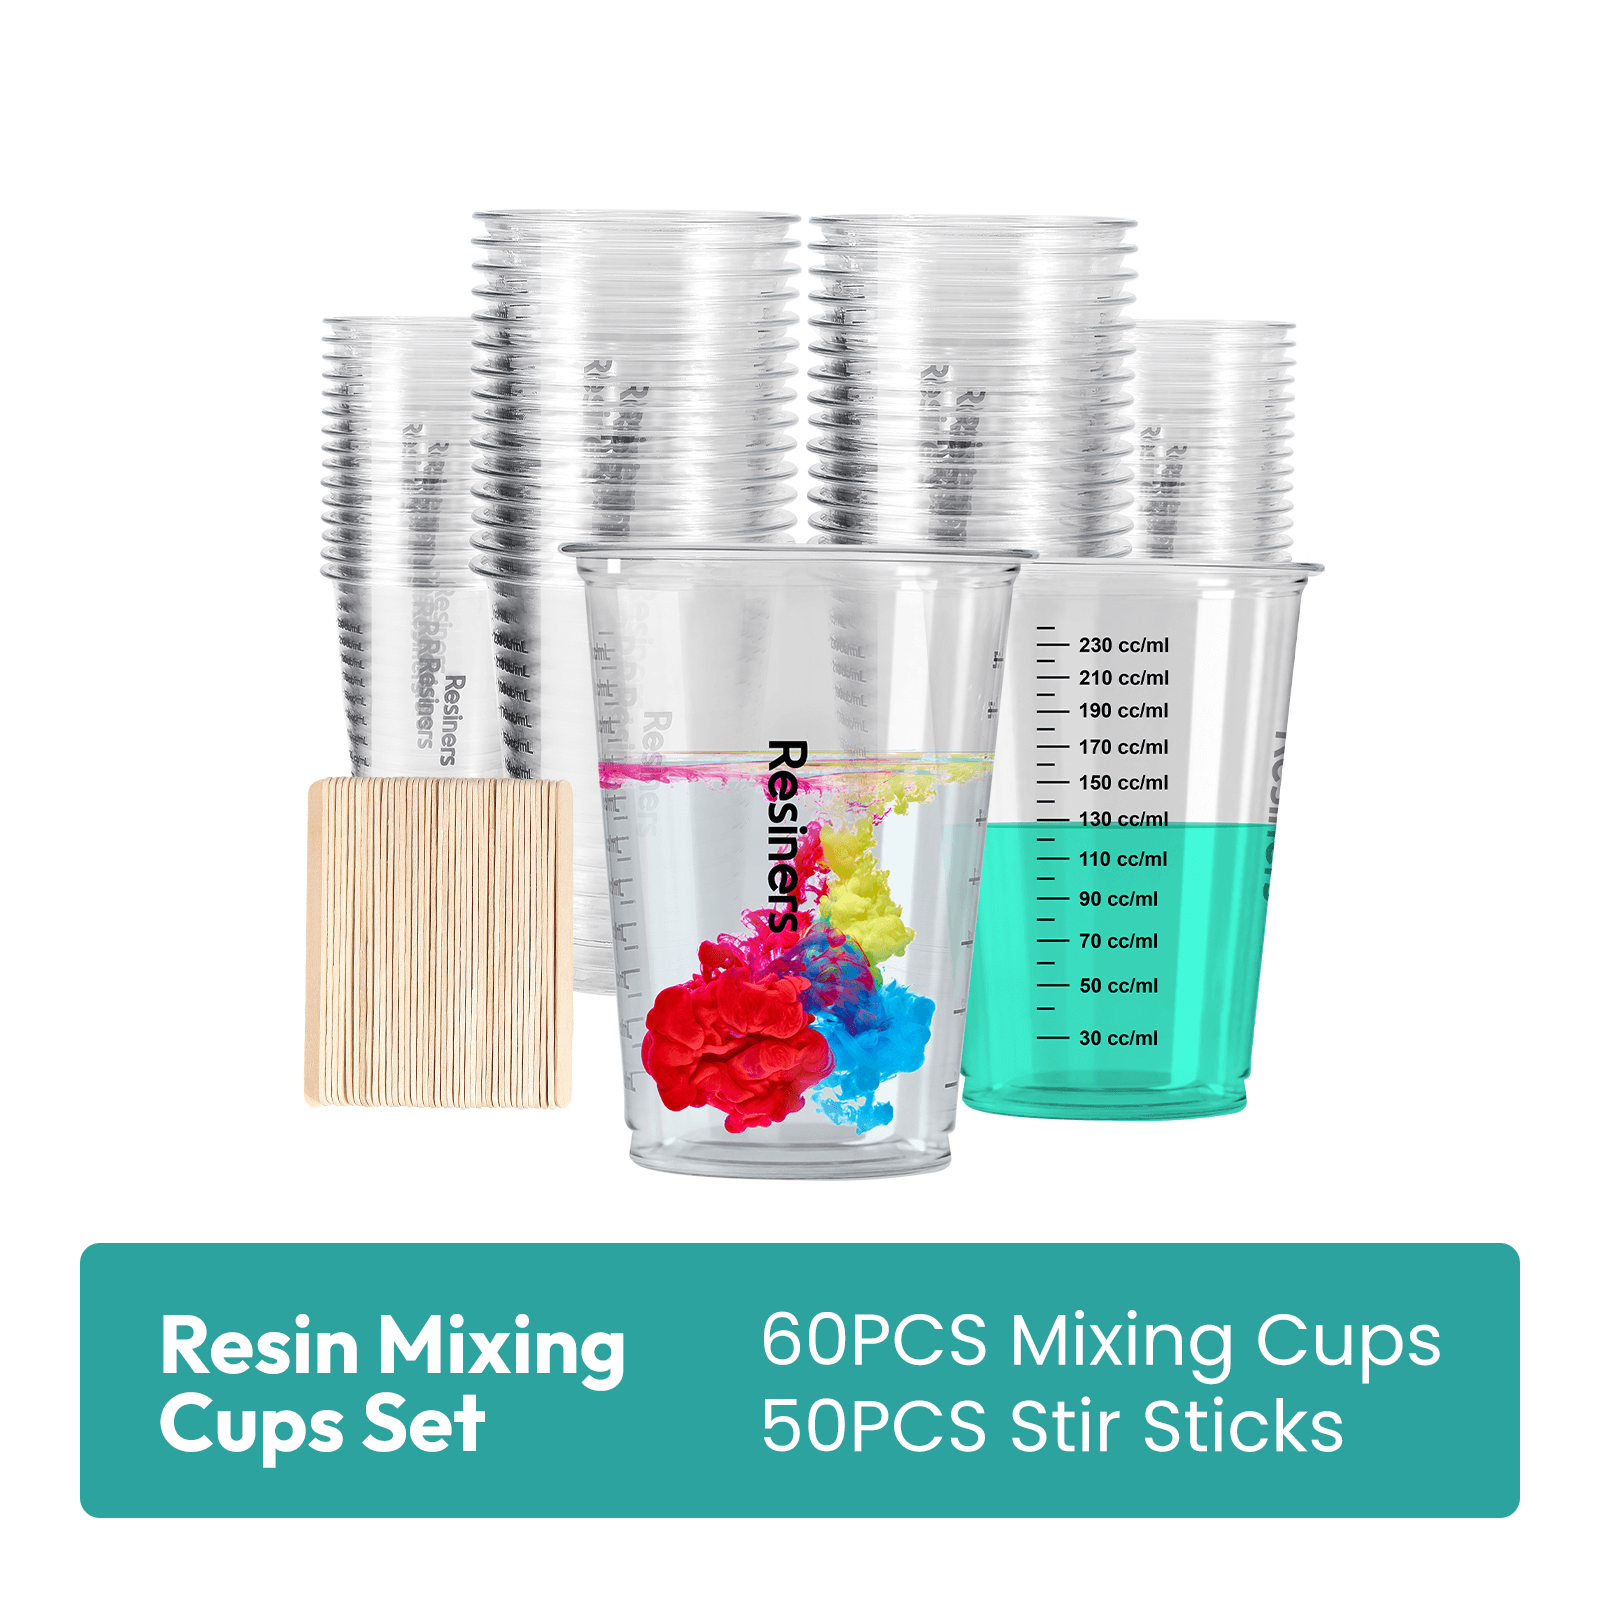  Epoxy Mixing Cups - Disposable 8oz.